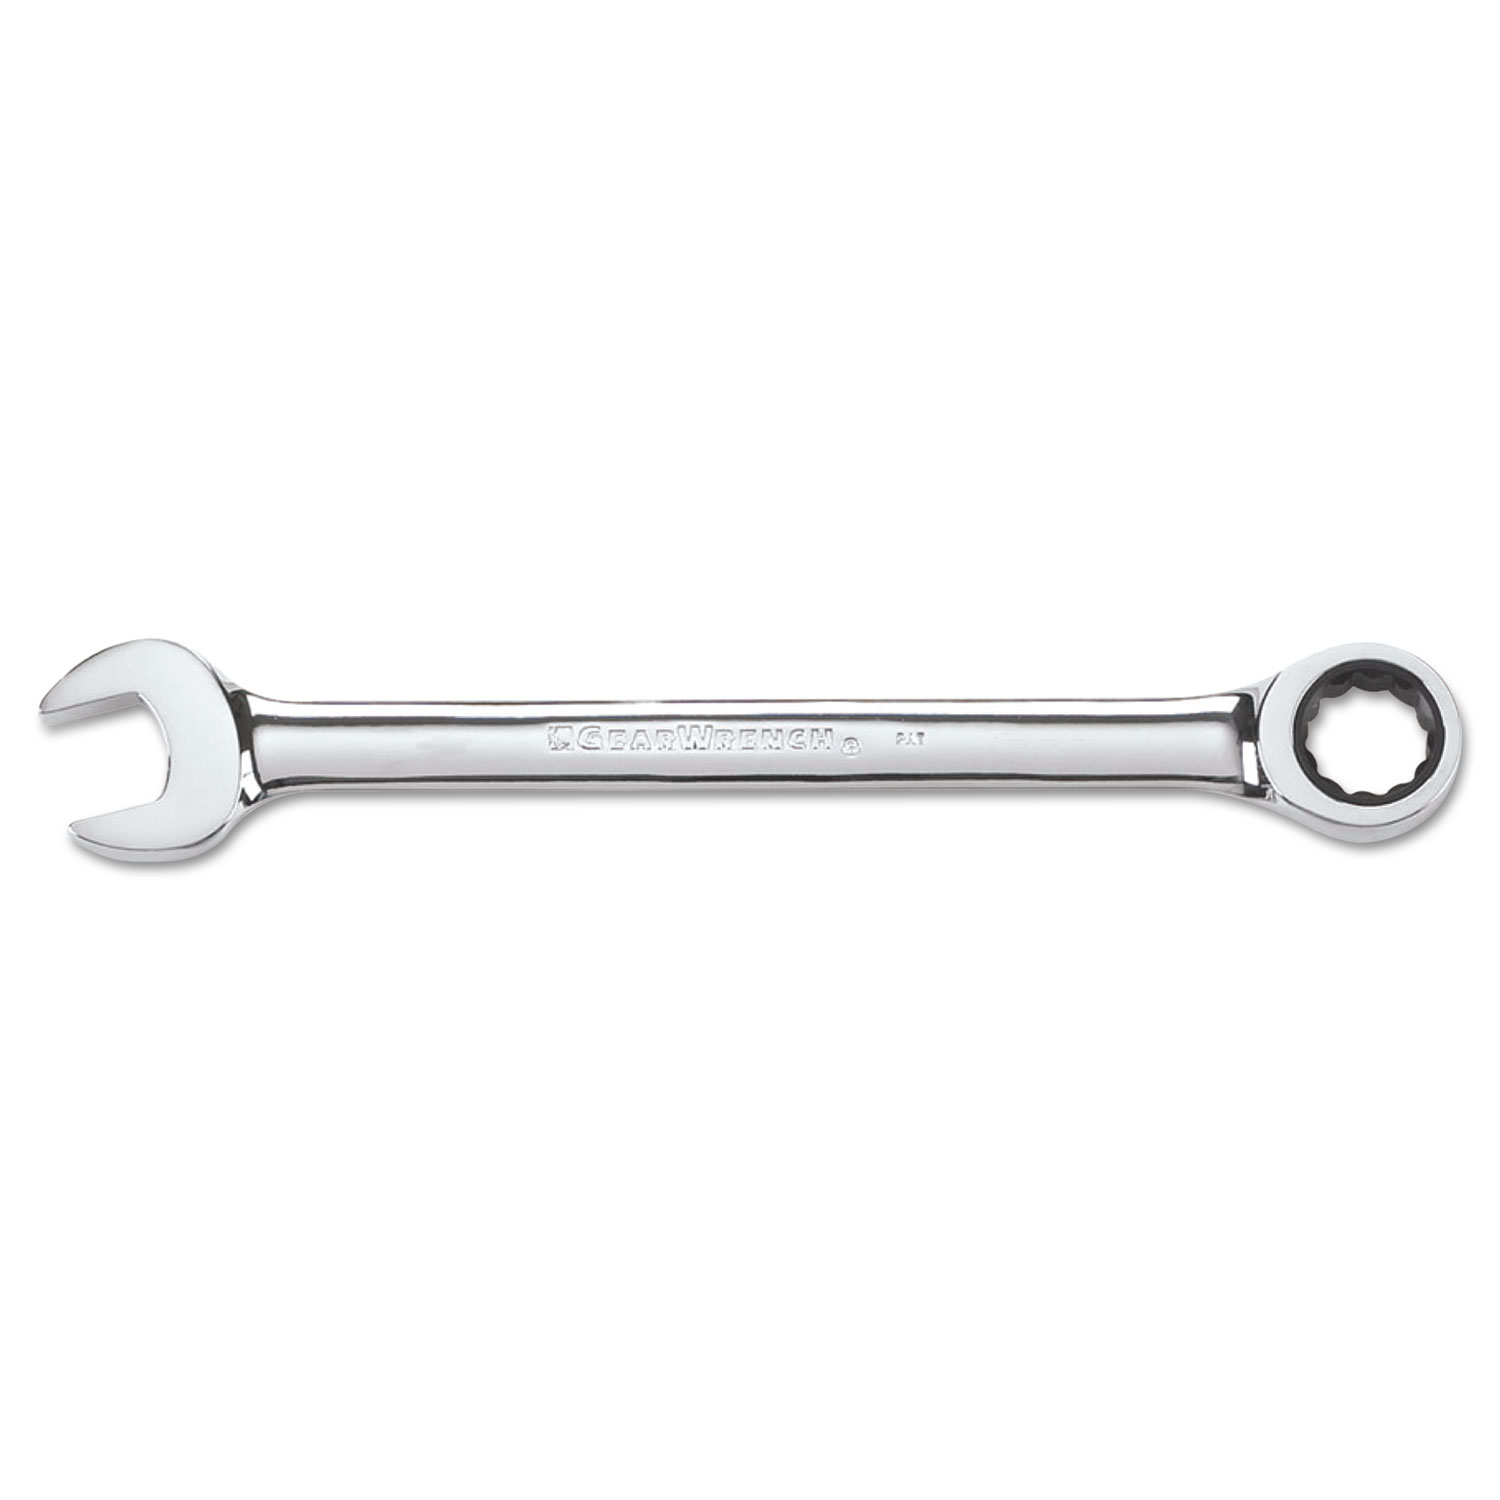  GearWrench 9028D GearWrench Ratcheting Combo Wrench, 11.4 Long, 7/8 Opening, Chrome Finish (GRW9028) 